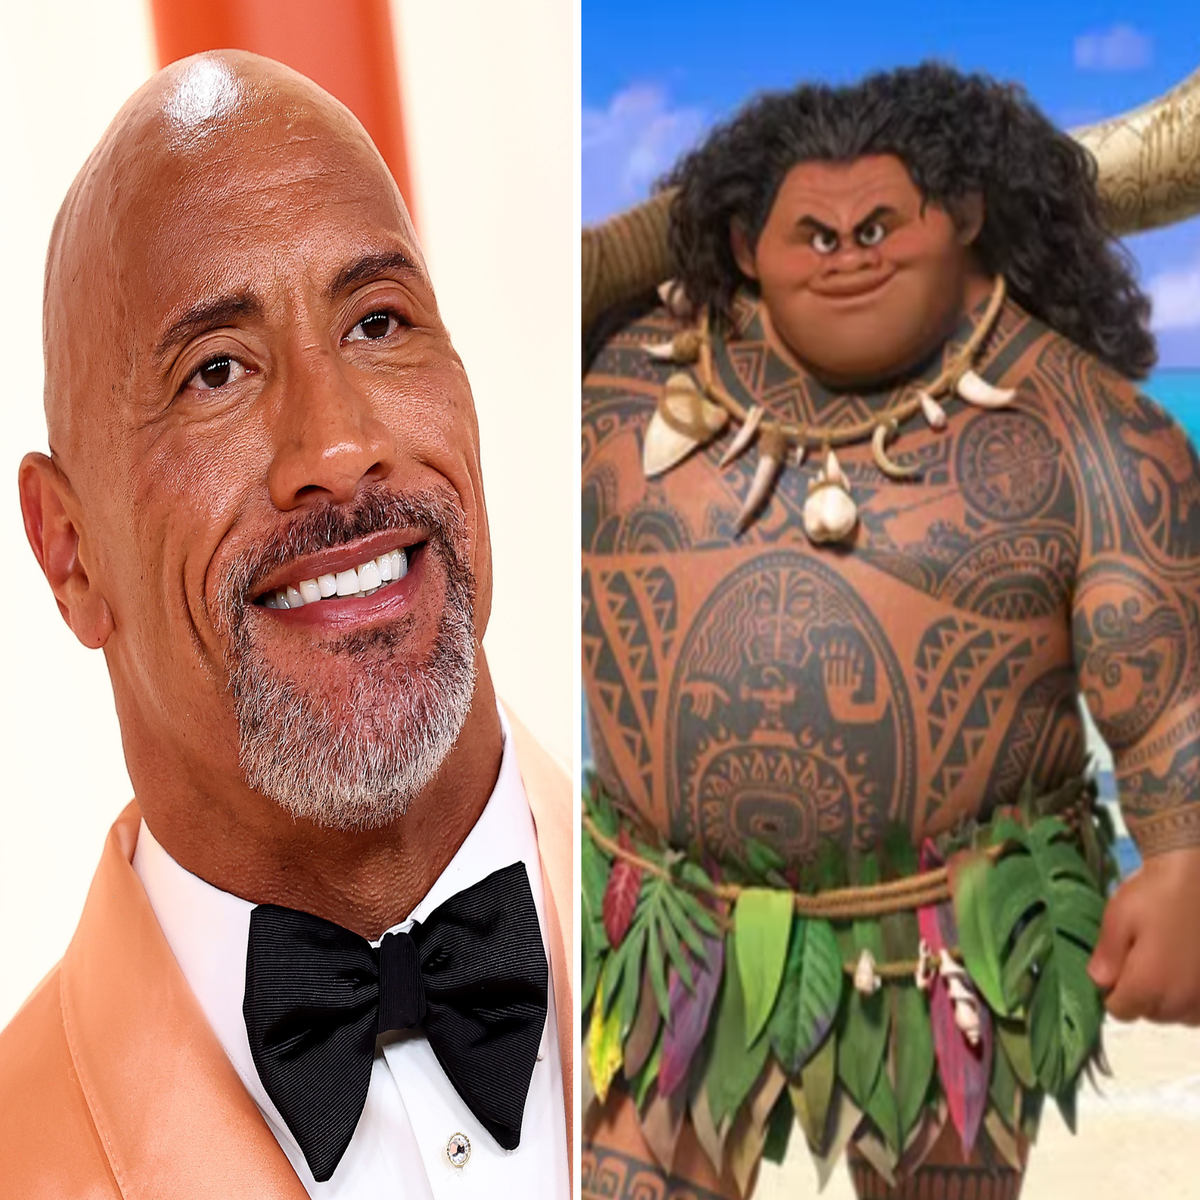 Moana is being made into a live-action movie with Dwayne Johnson